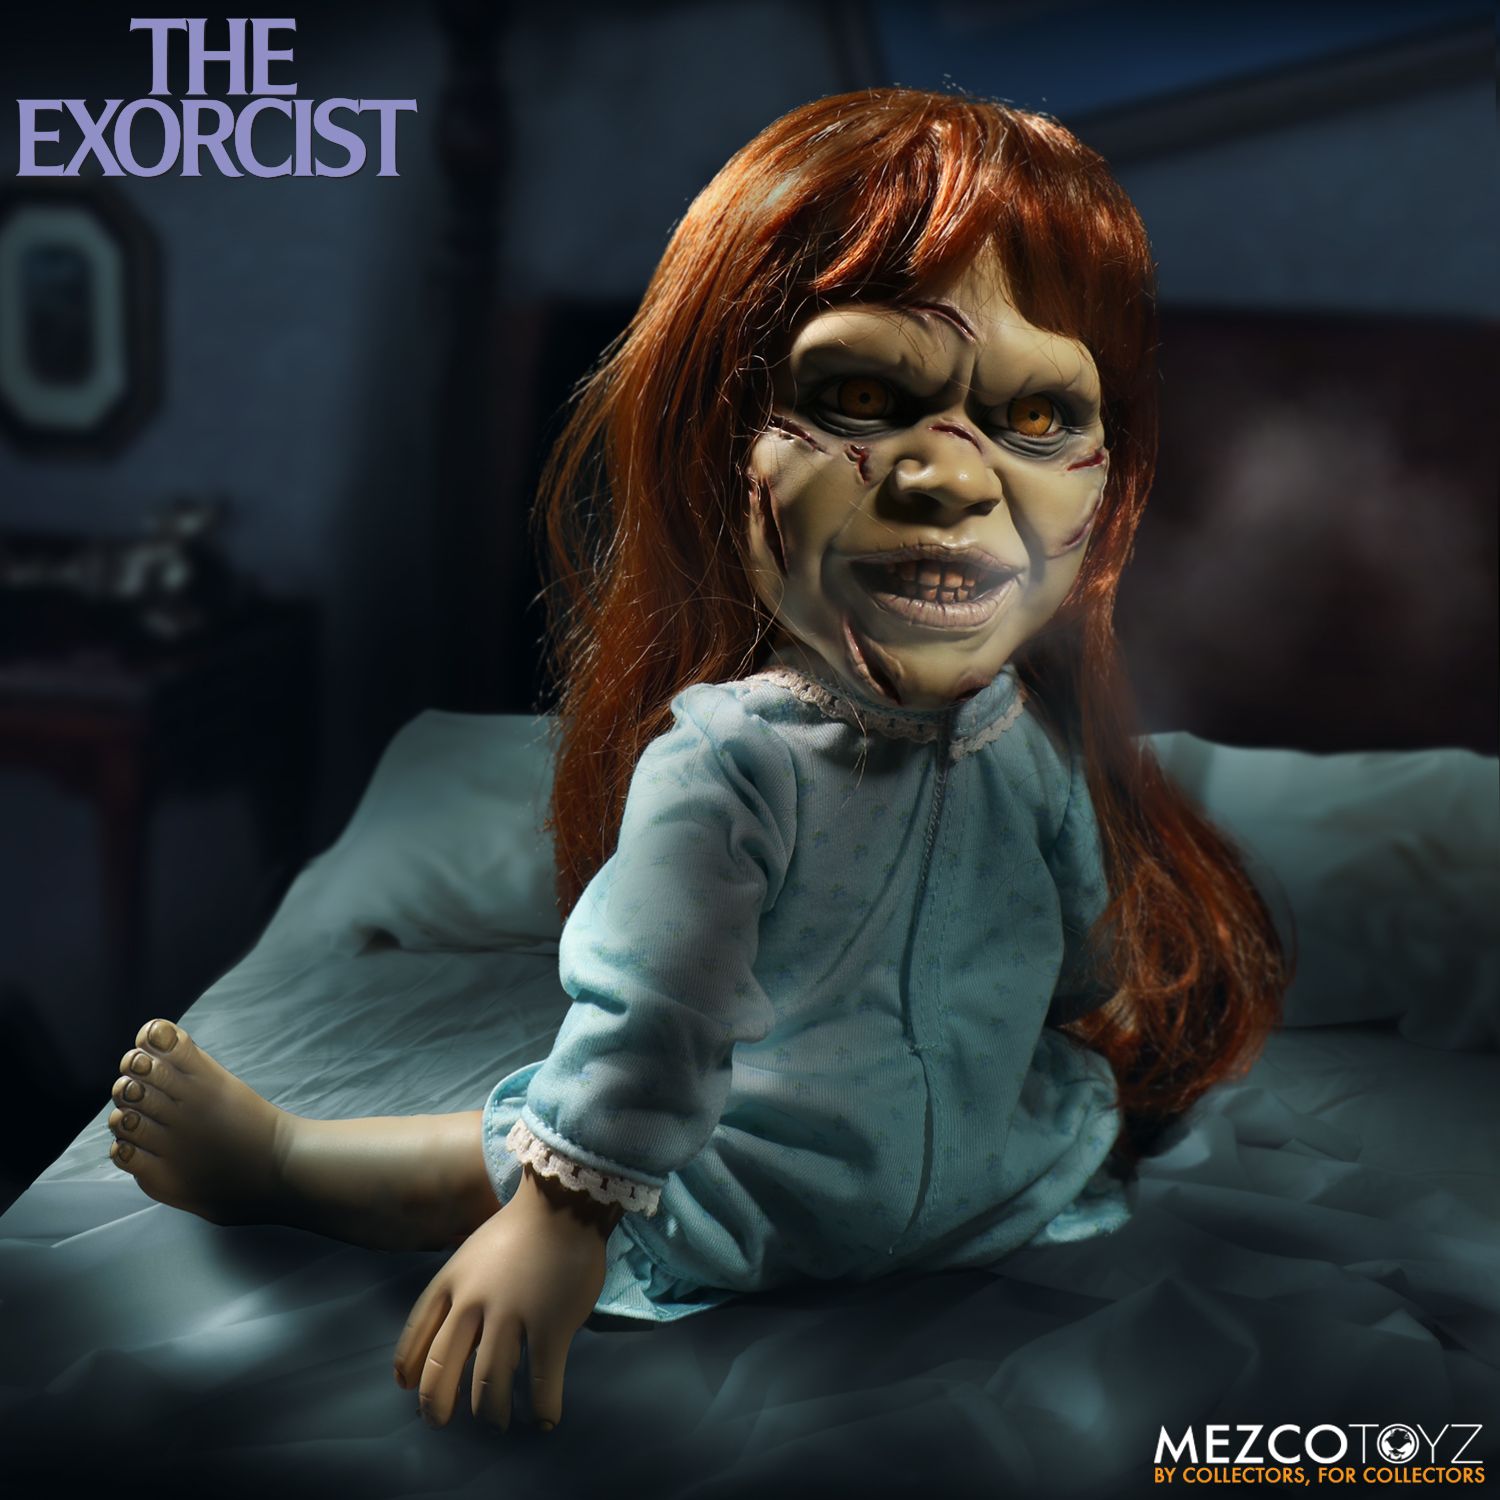 Mezco Toyz 15" Mega Scale Exorcist with Sound Feature Action Figure NEW IN Stock 